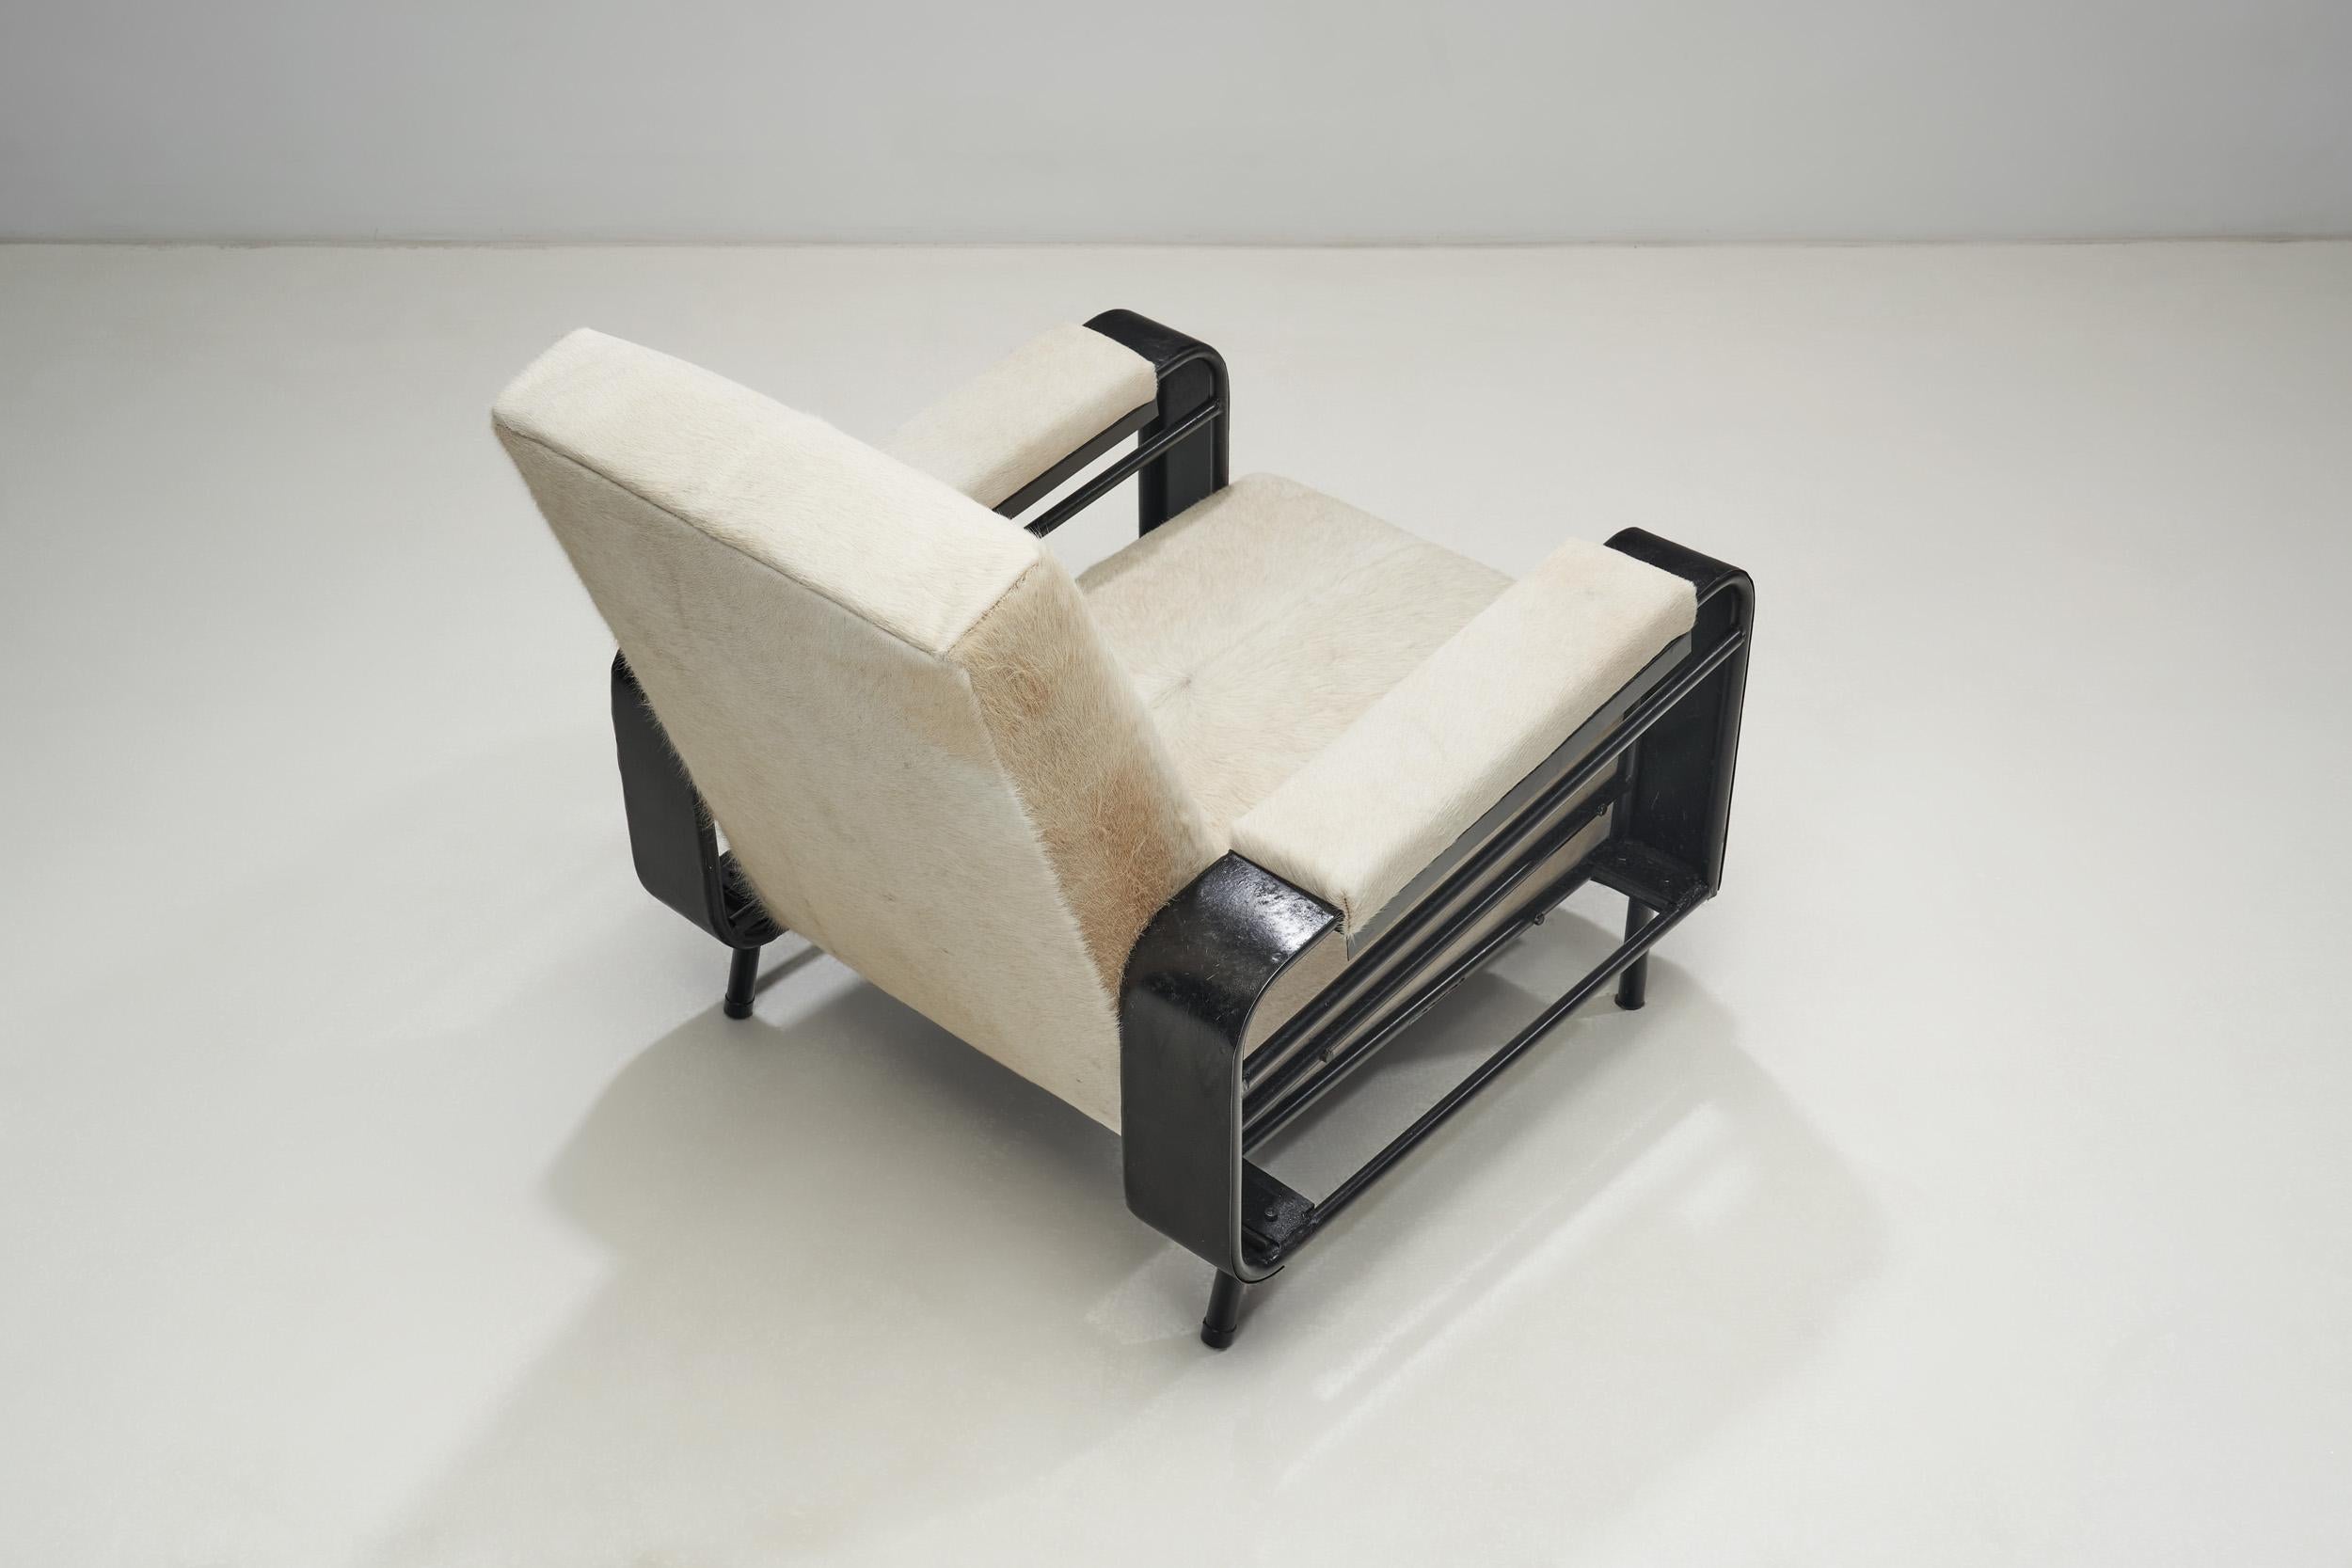 Mid-20th Century Airborne Metal Lounge Chairs Upholstered in Cow Hide, France ca 1950s For Sale